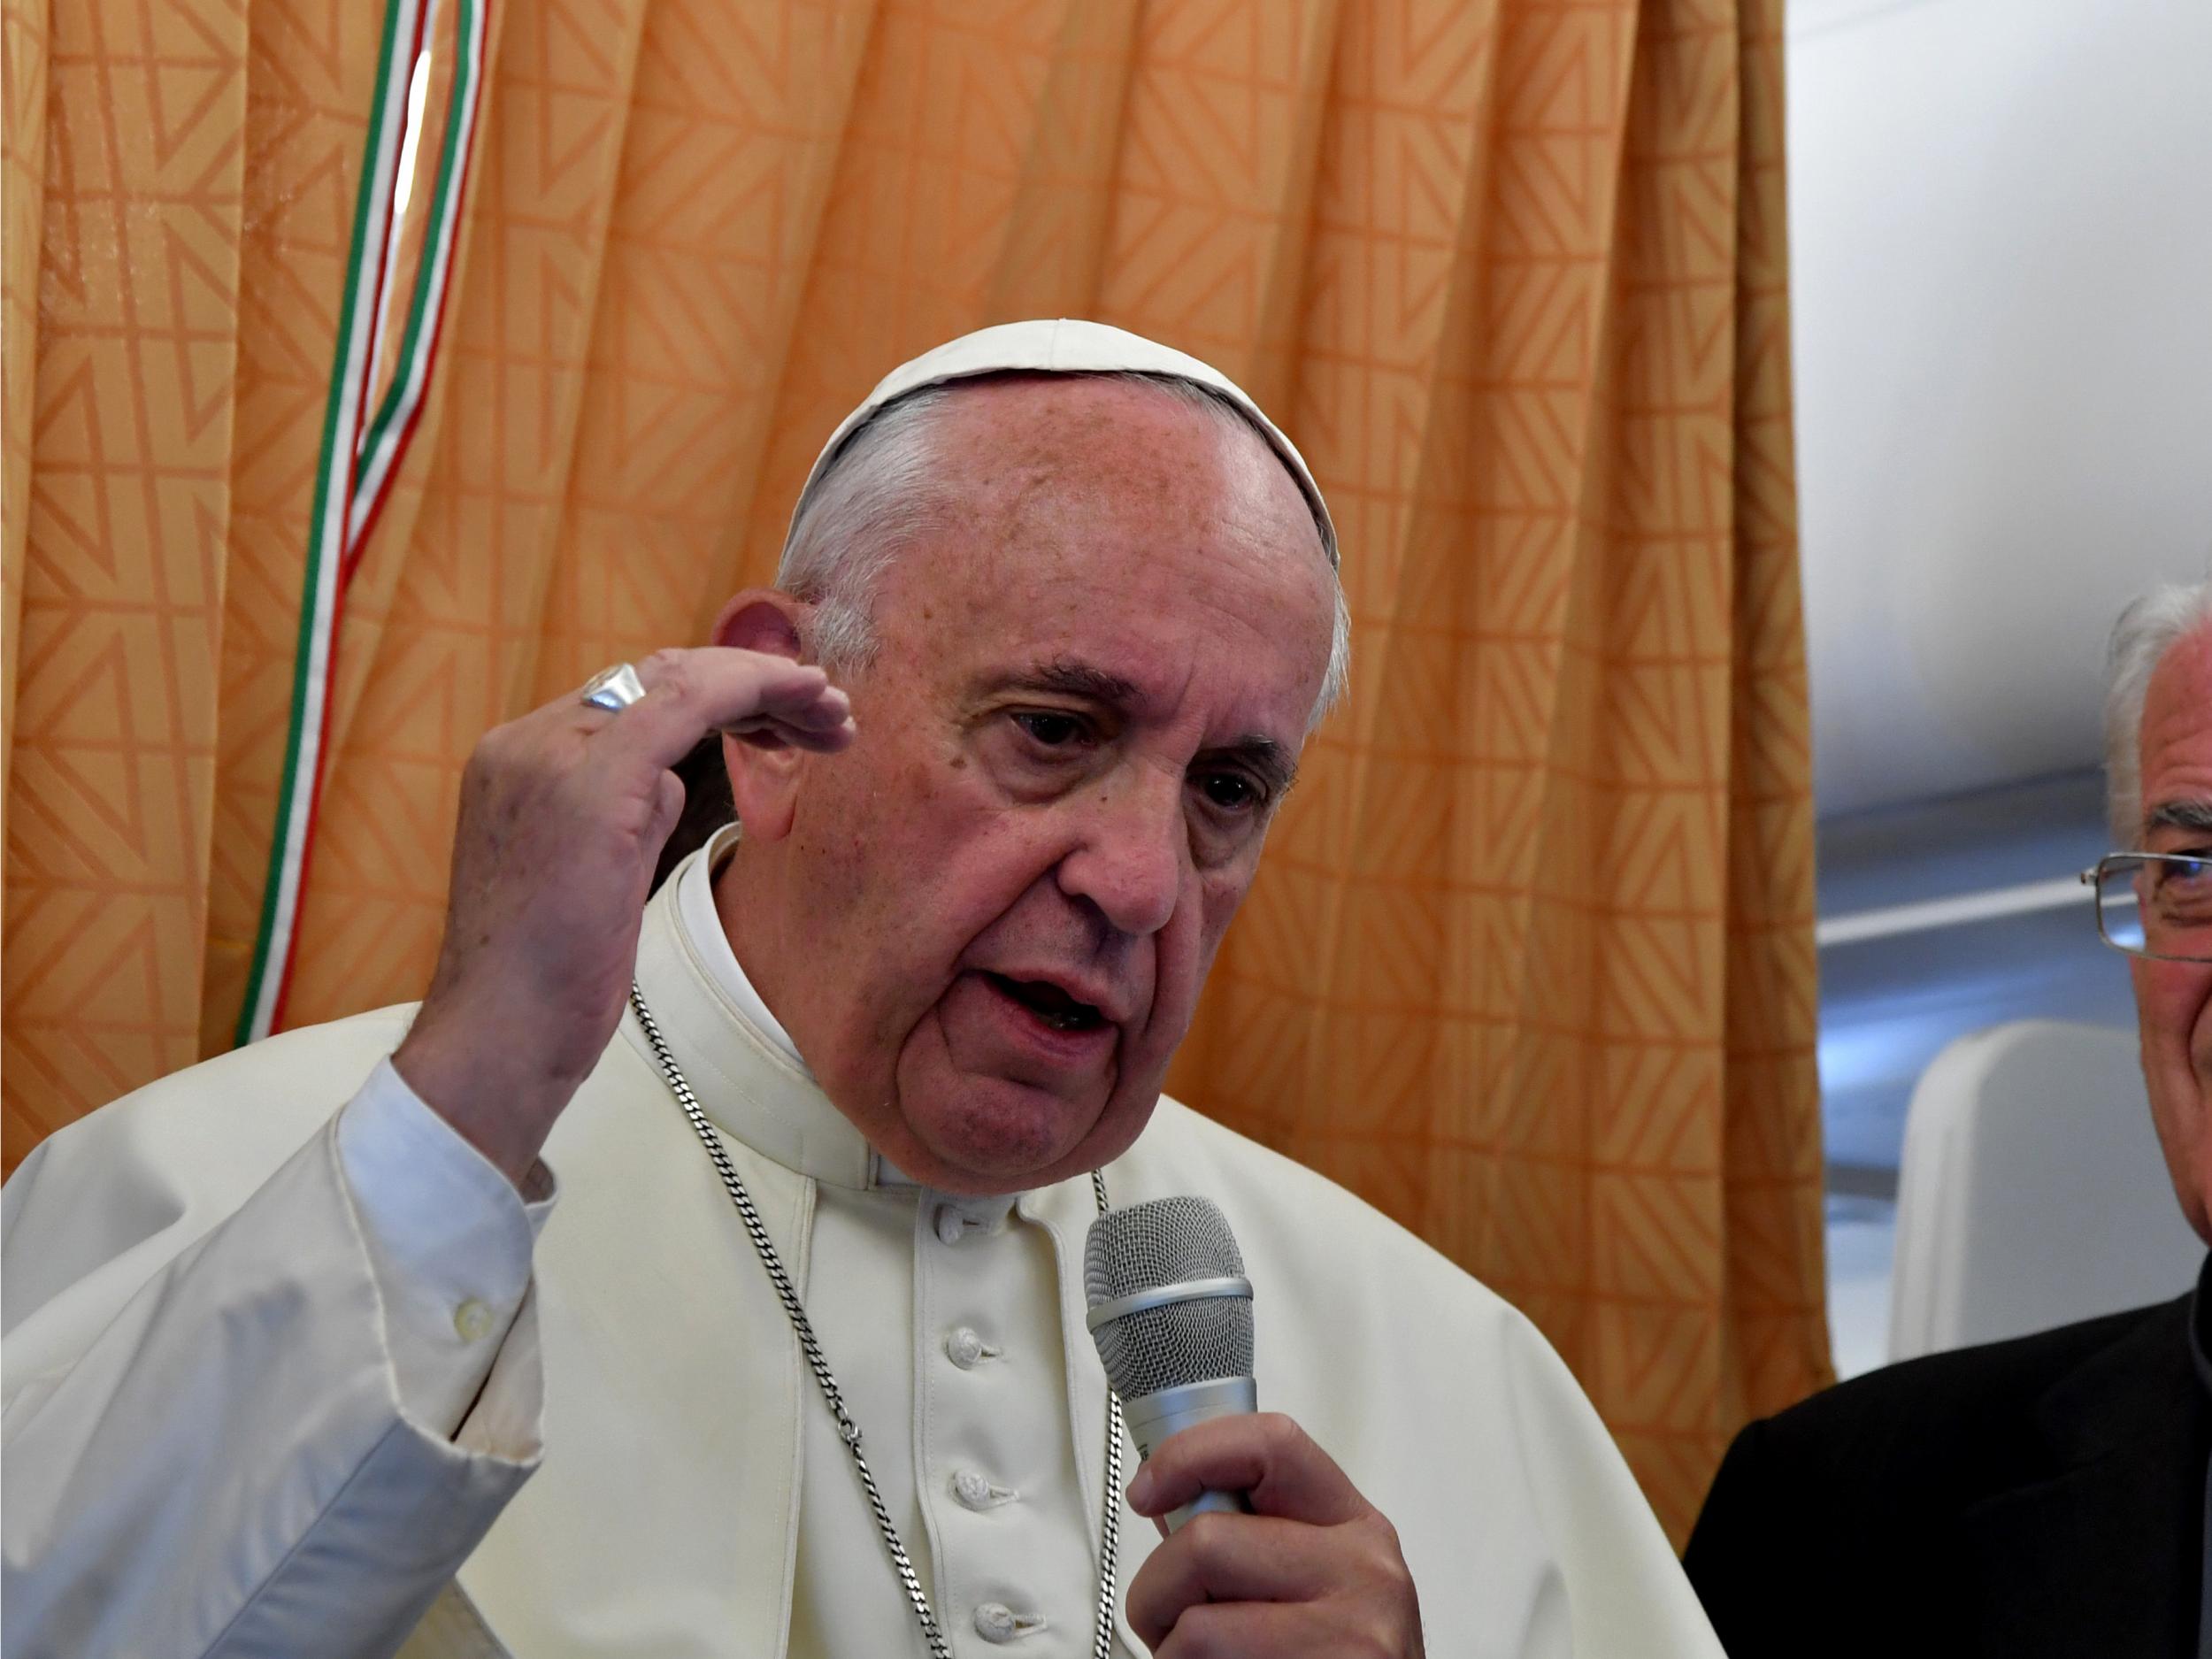 The pope said that Christians should seek forgiveness for marginalising gay people